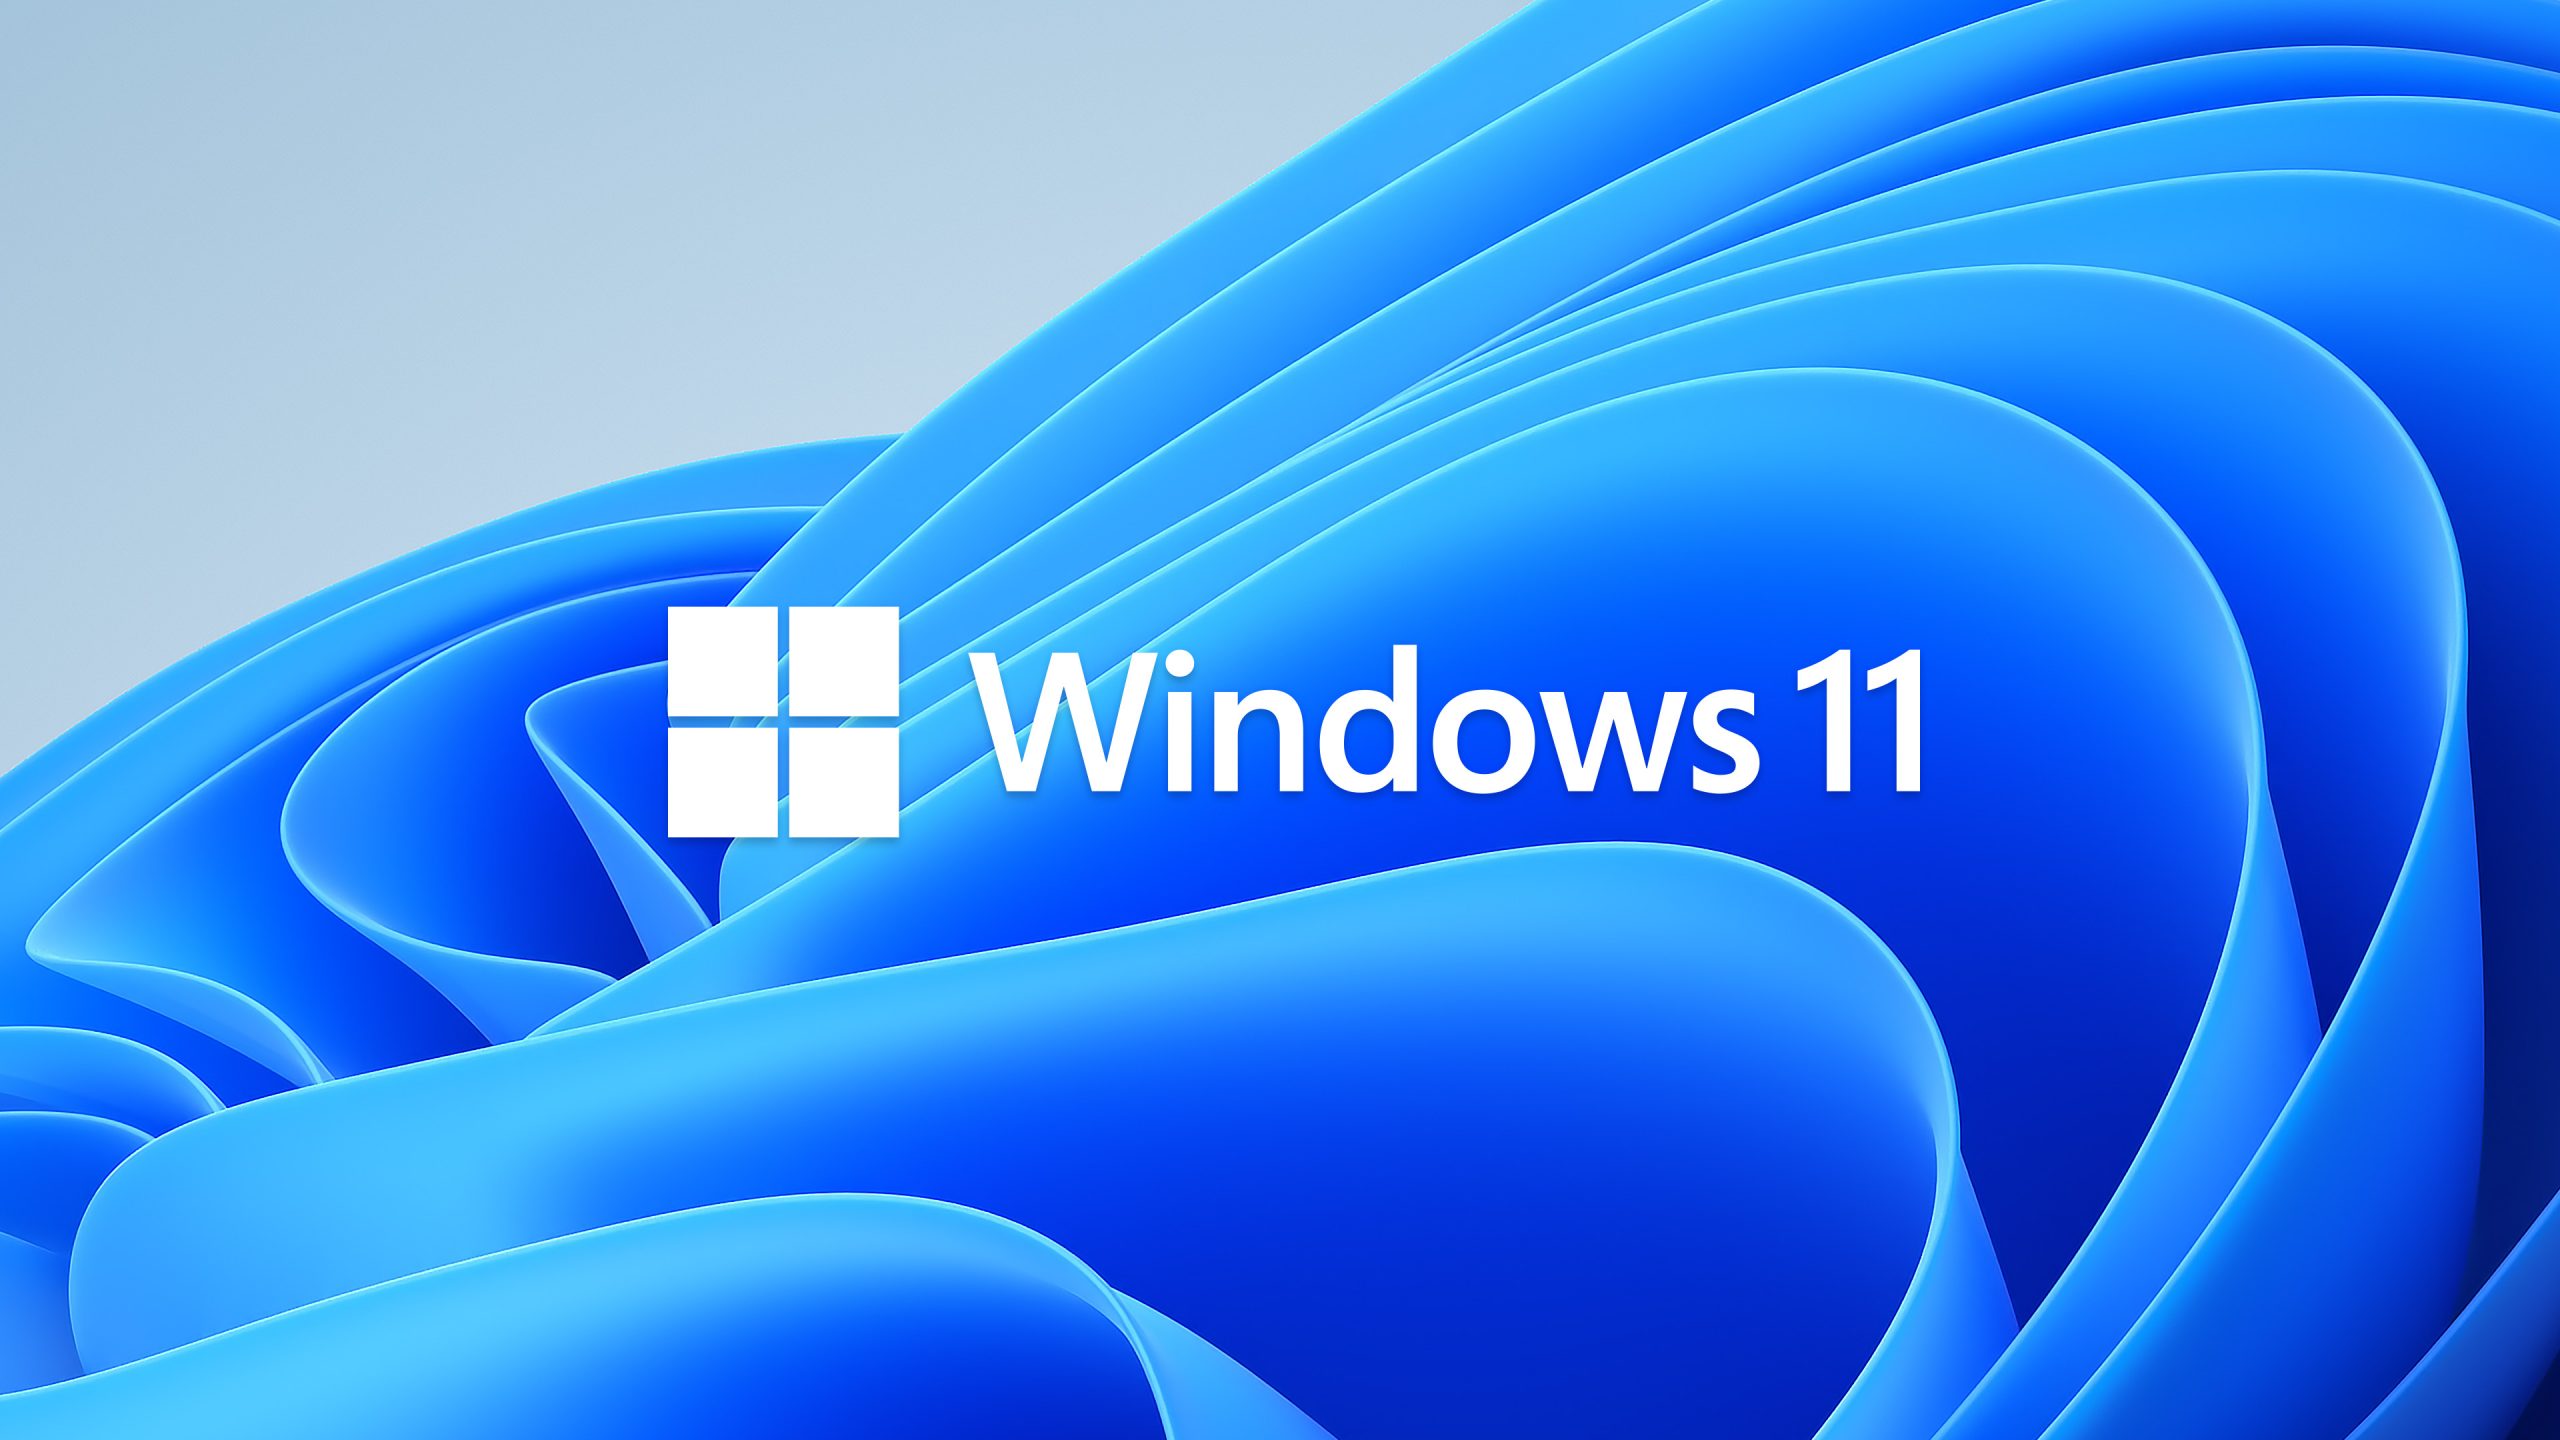 Windows 11 Release: What to Expect